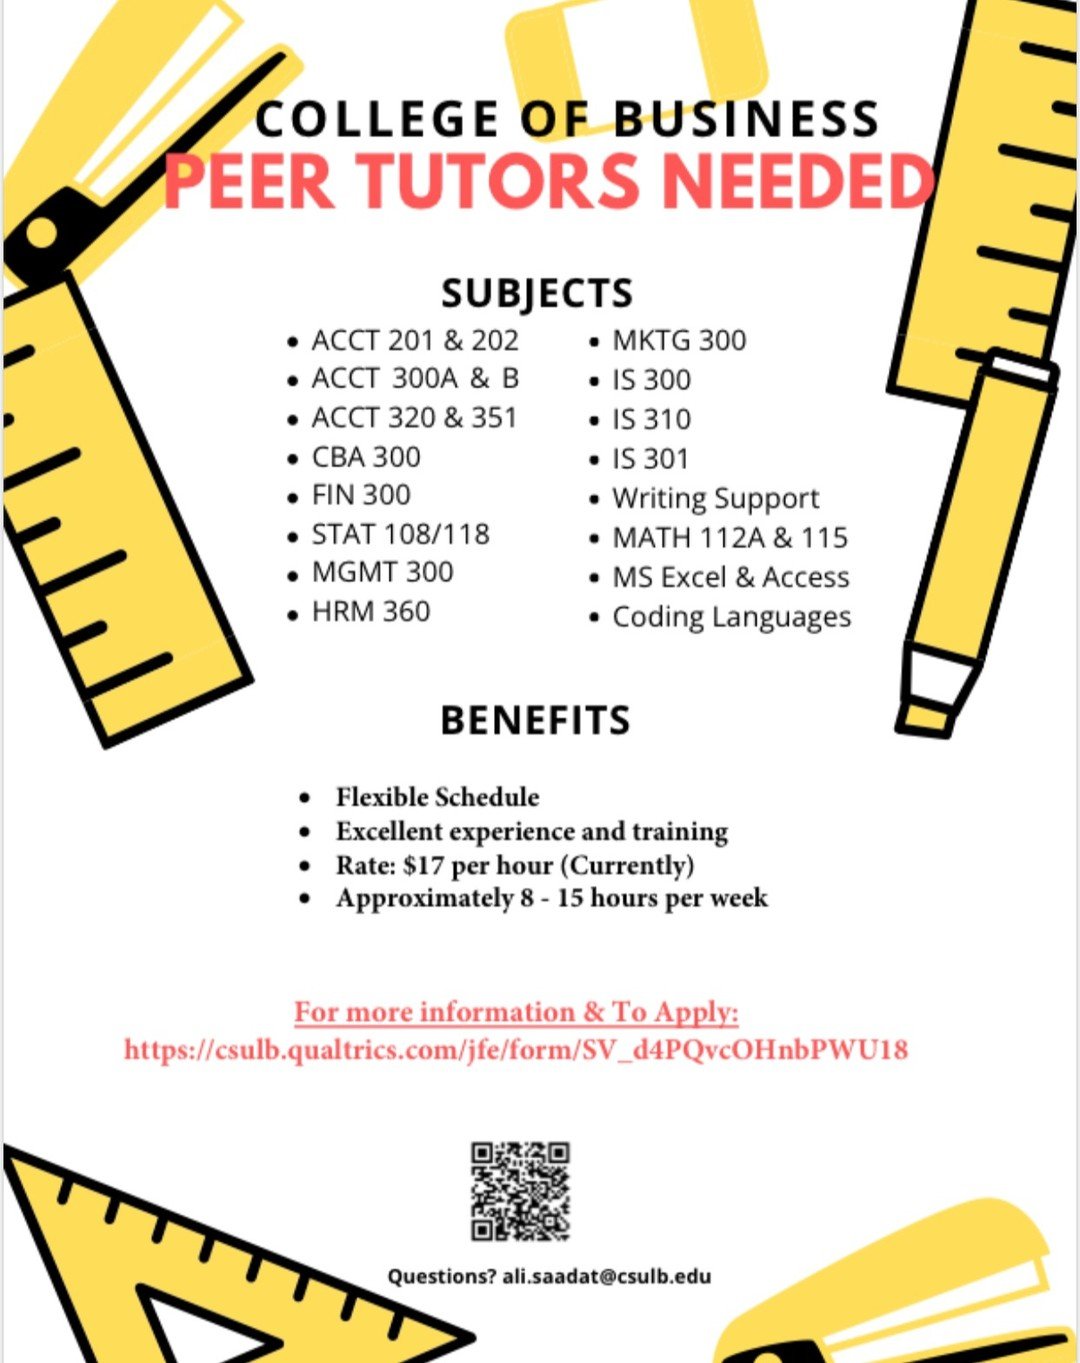 Tutoring Job Opportunity!!! ✏📐

This is a great opportunity if you are looking for a job on campus! Please sign-up ASAP! 

Let us know if you have any questions, or you can email Ali at ali.saadat@csulb.edu!